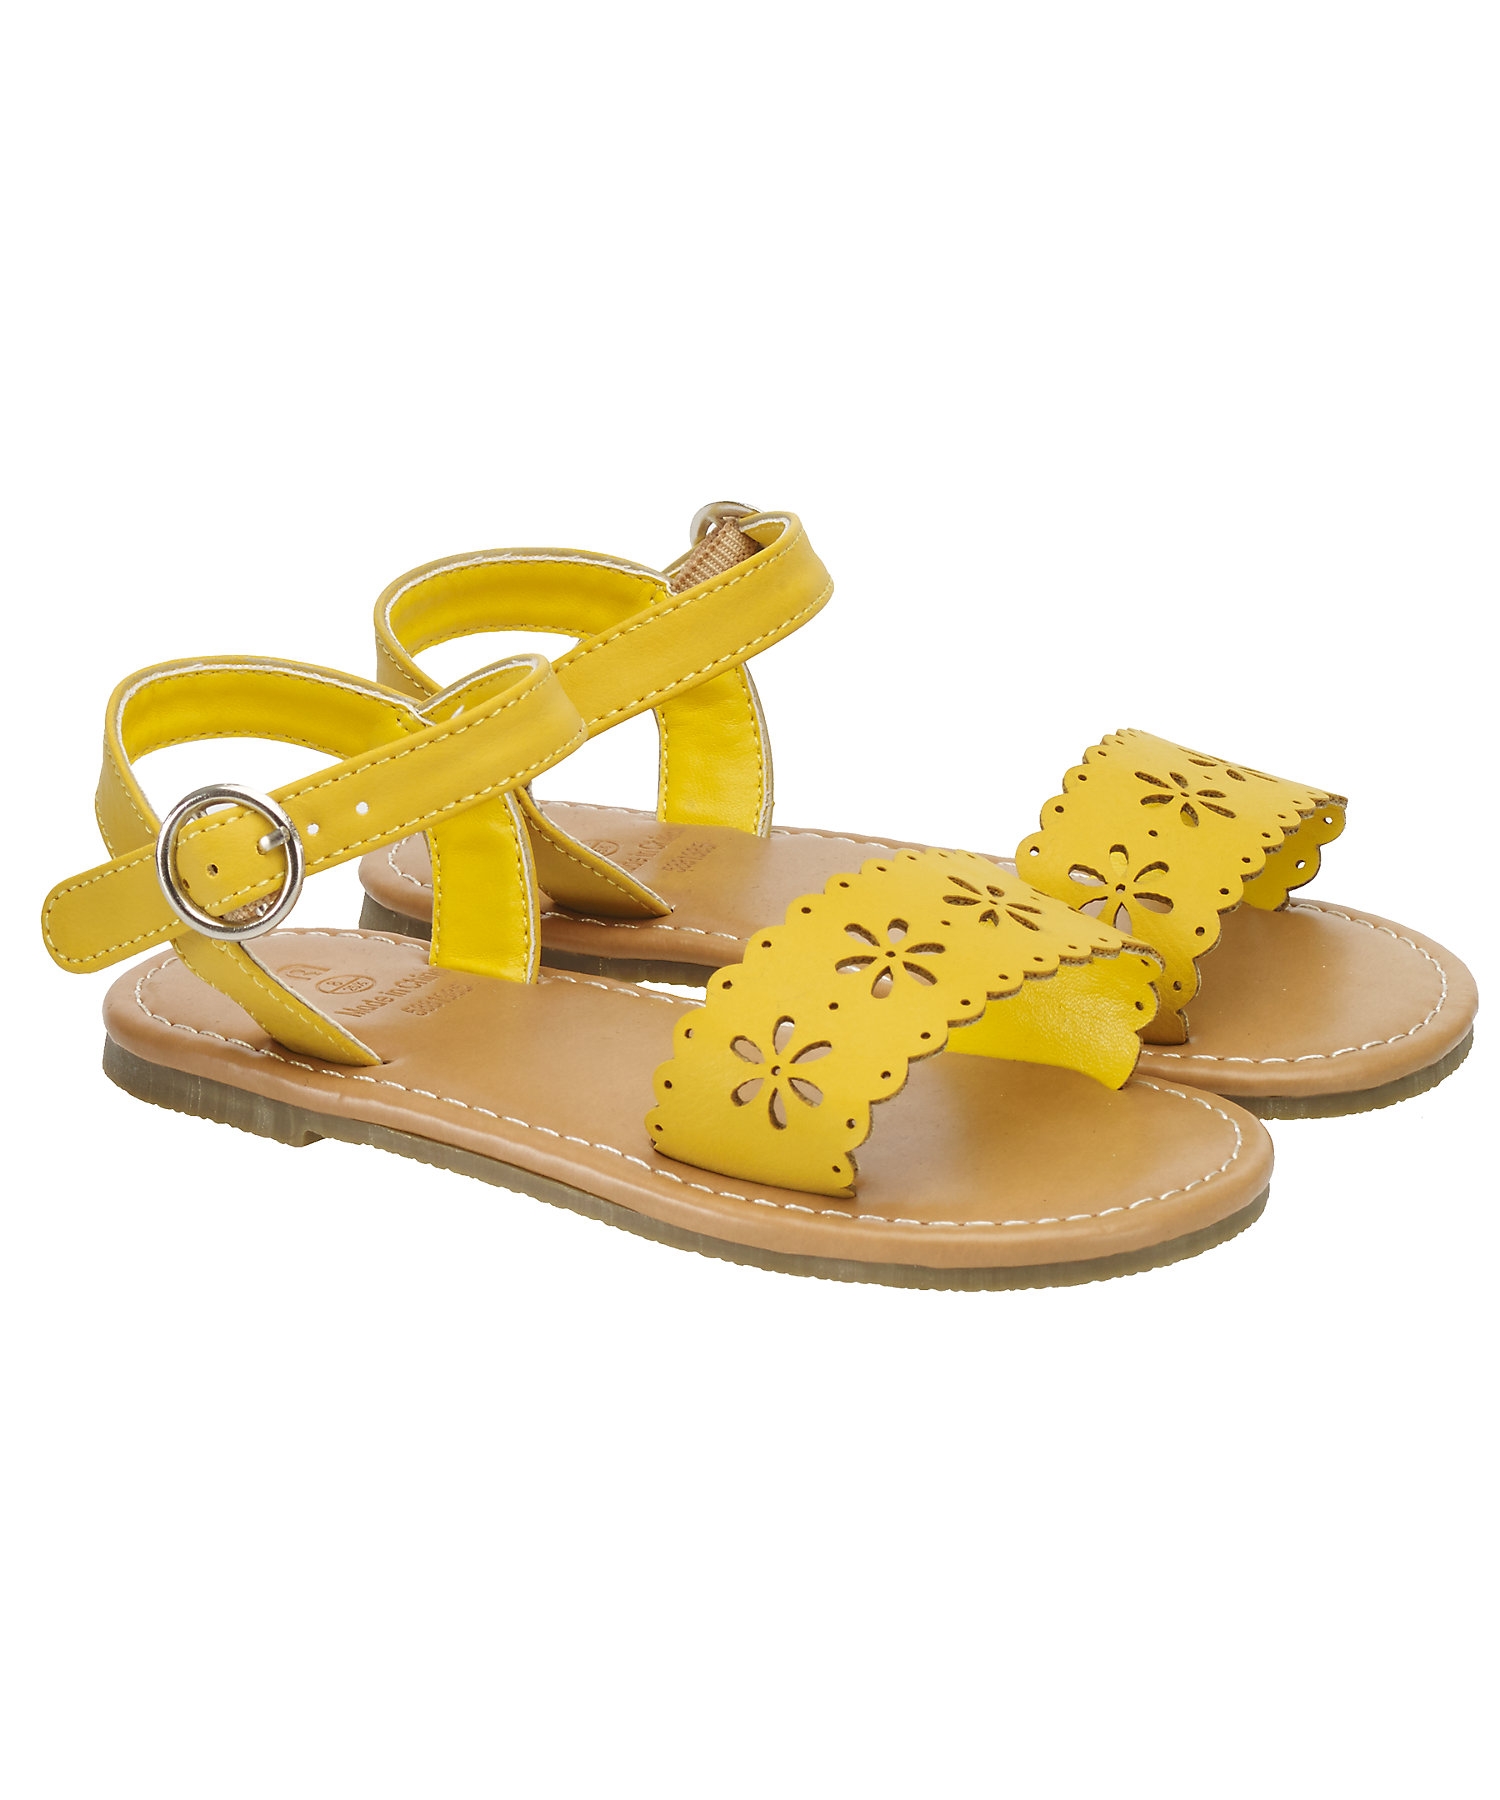 Mothercare | Girls Sandals Cut Out Design - Yellow 0